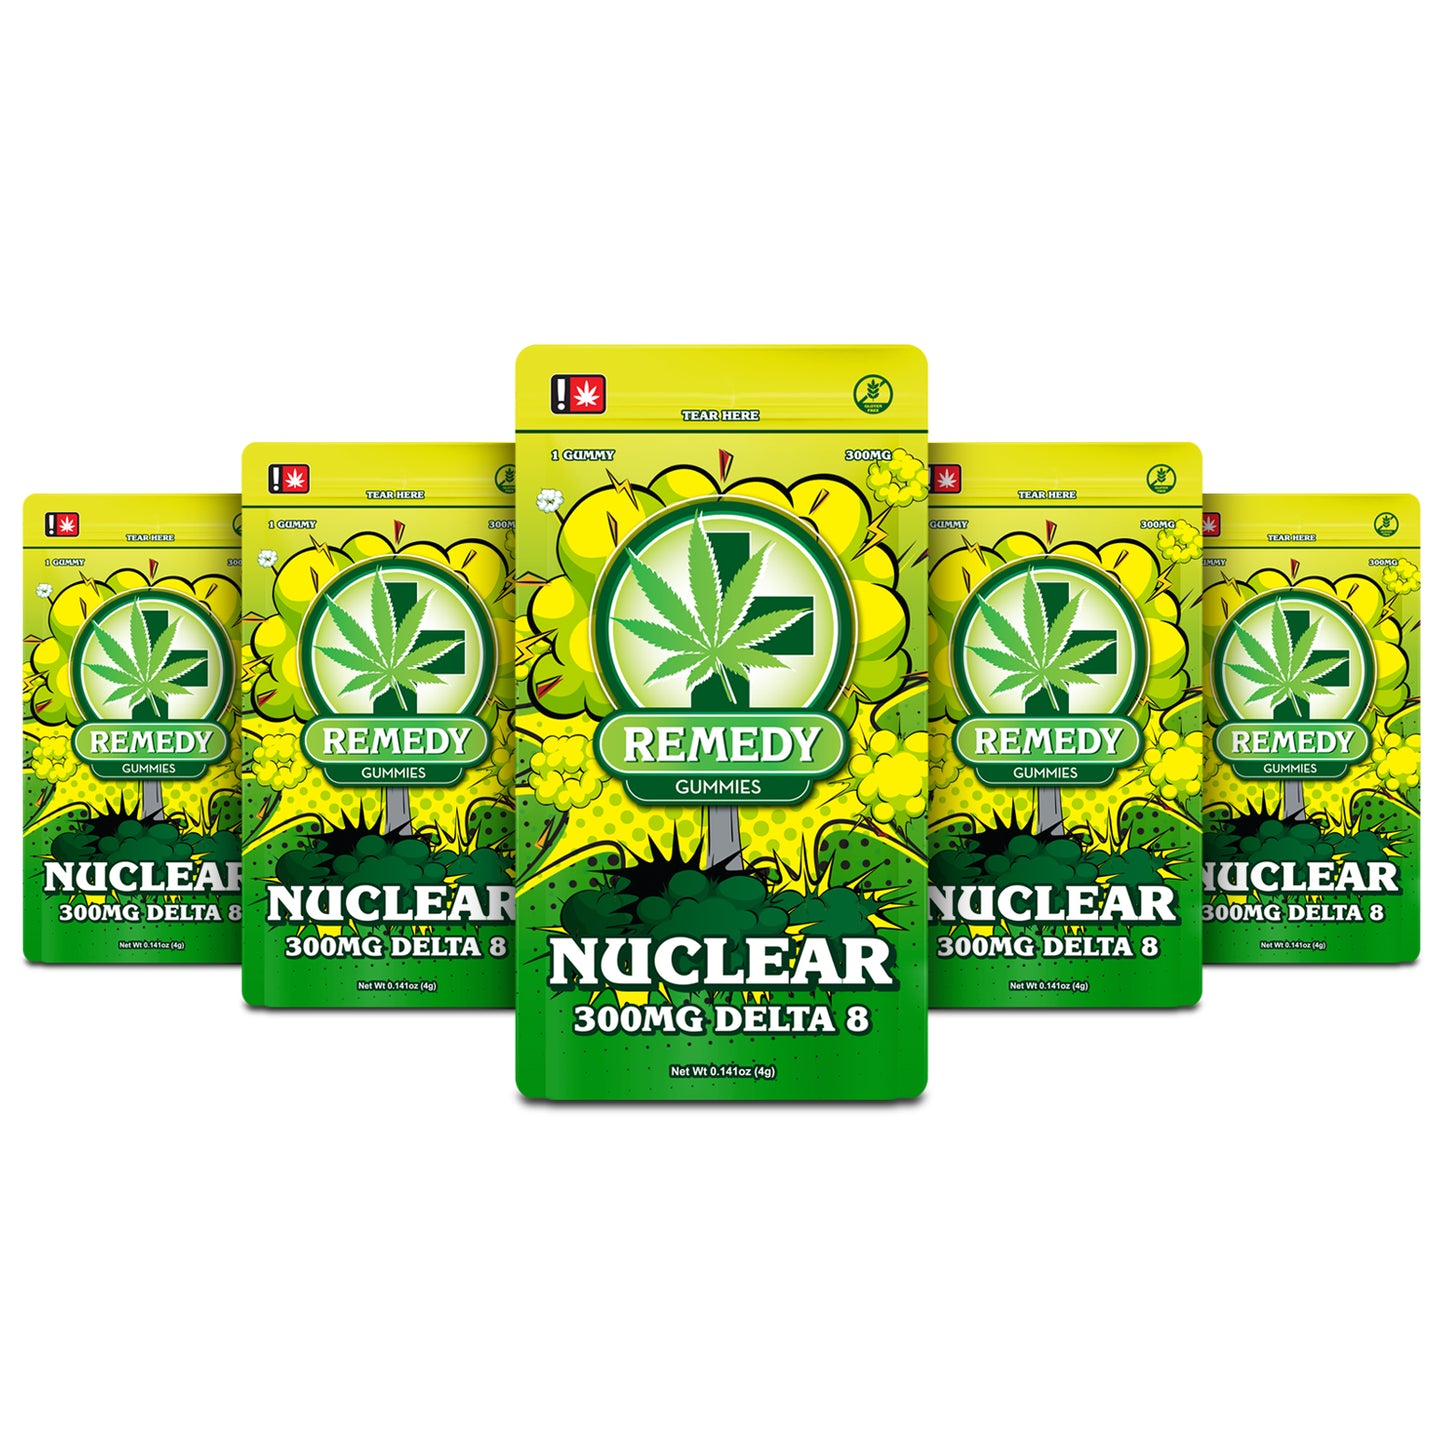 5 Pack Nuclear Gummies 300mg/1ct - Delta 8